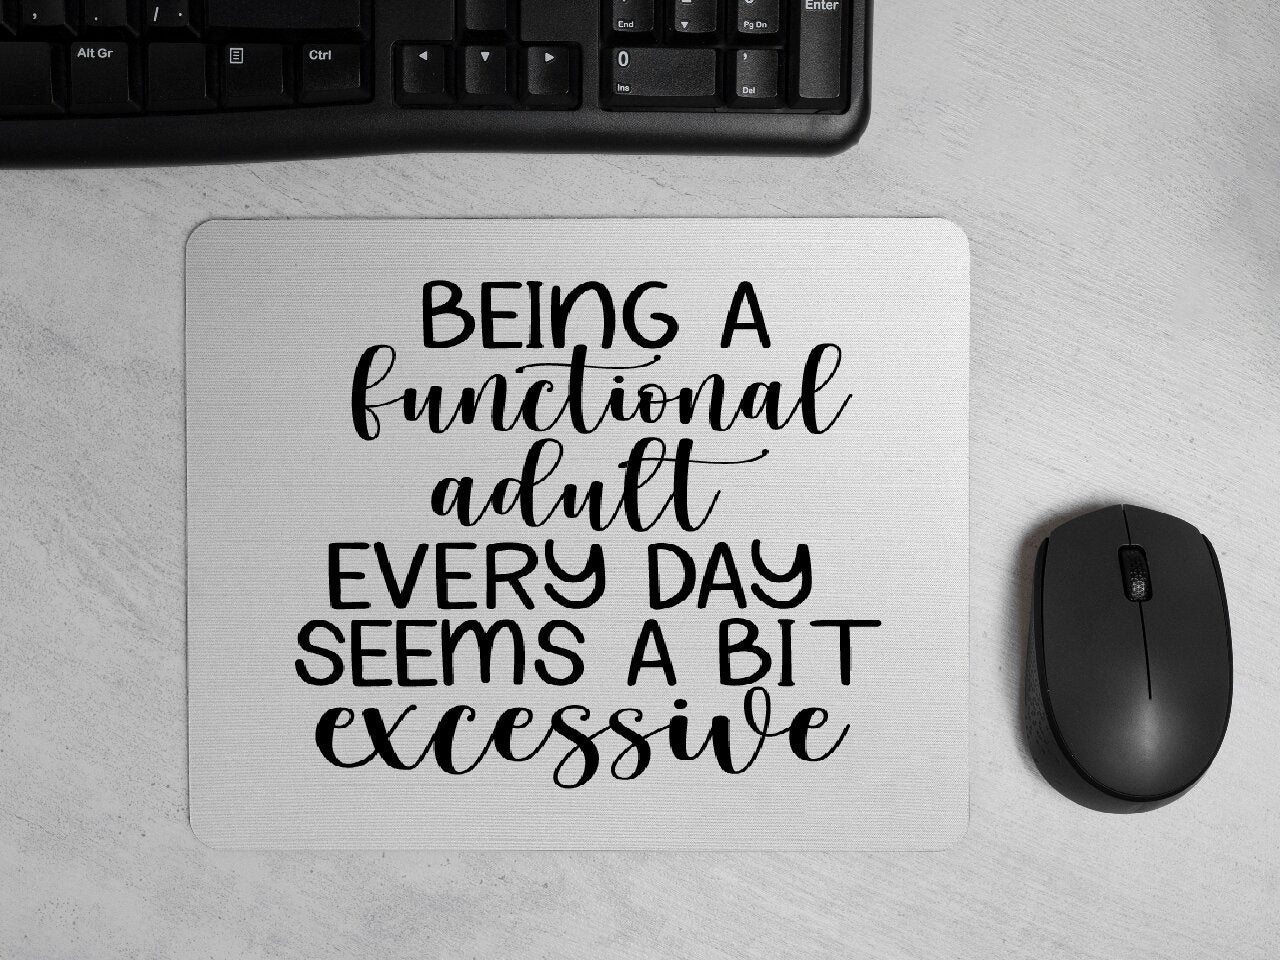 Being A Functional Adult Every Day Seems A Bit Excessive - Mouse Pad